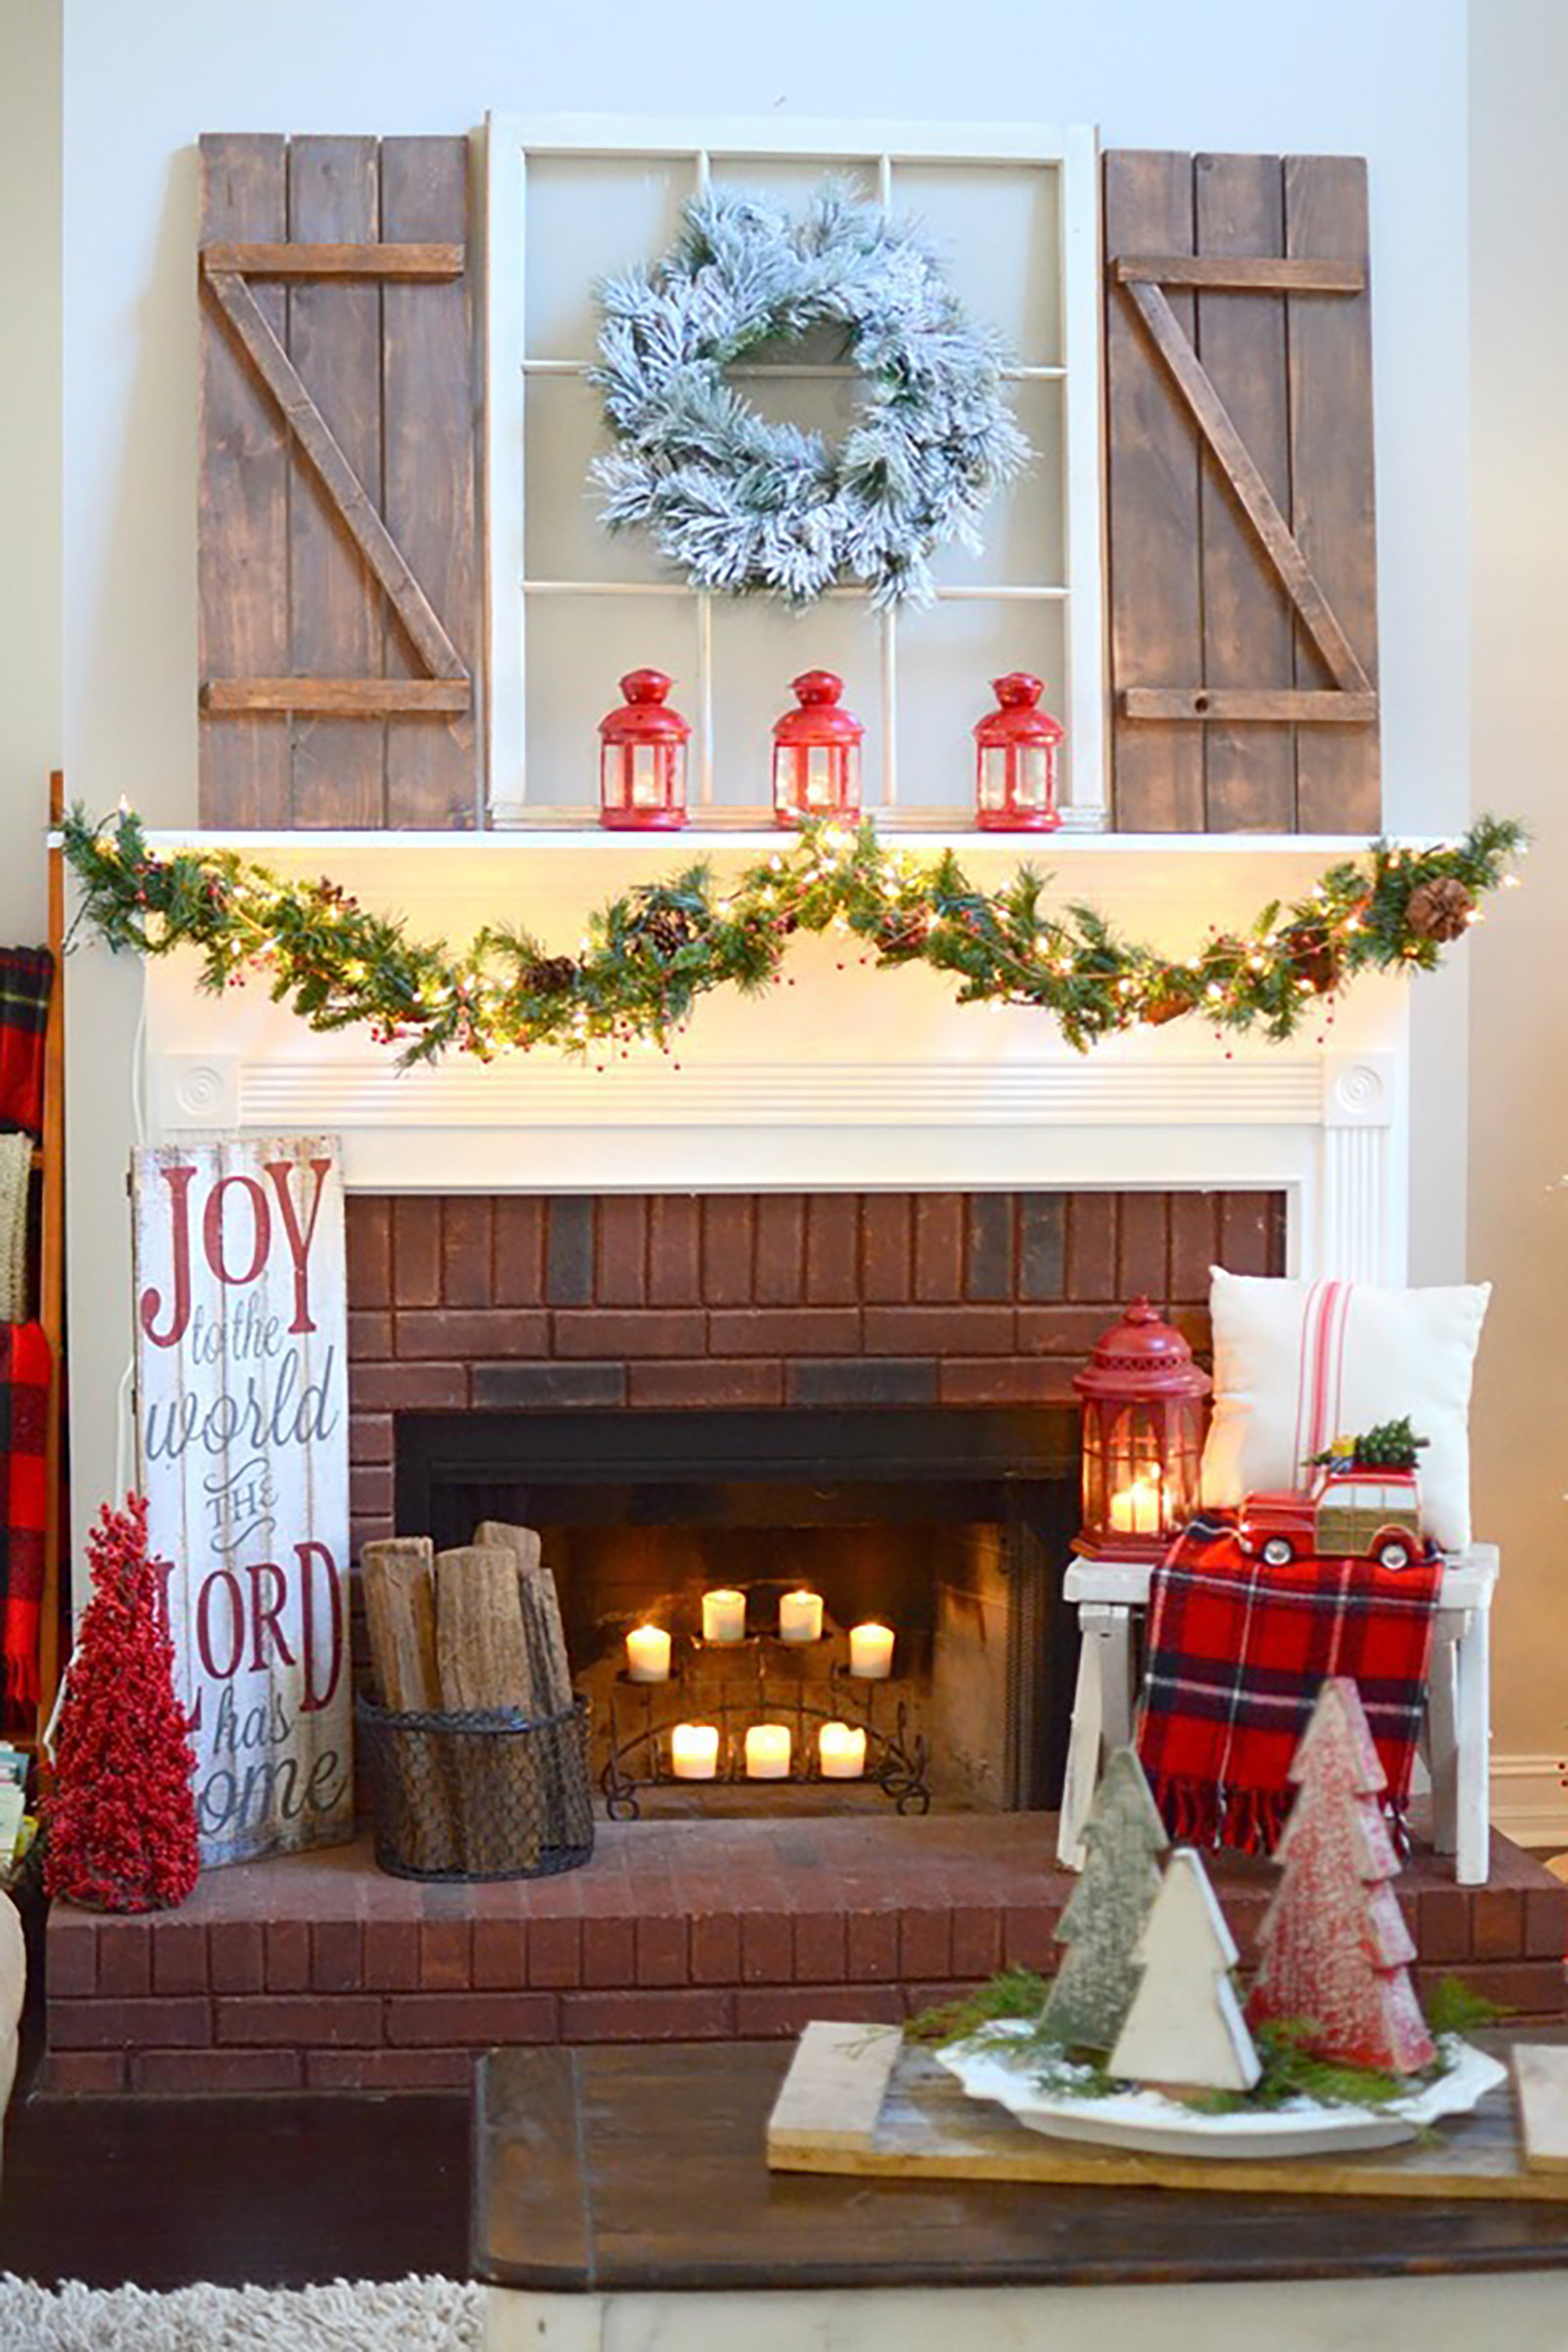 Fireplace Decorations For Christmas
 35 Christmas Mantel Decorations Ideas for Holiday